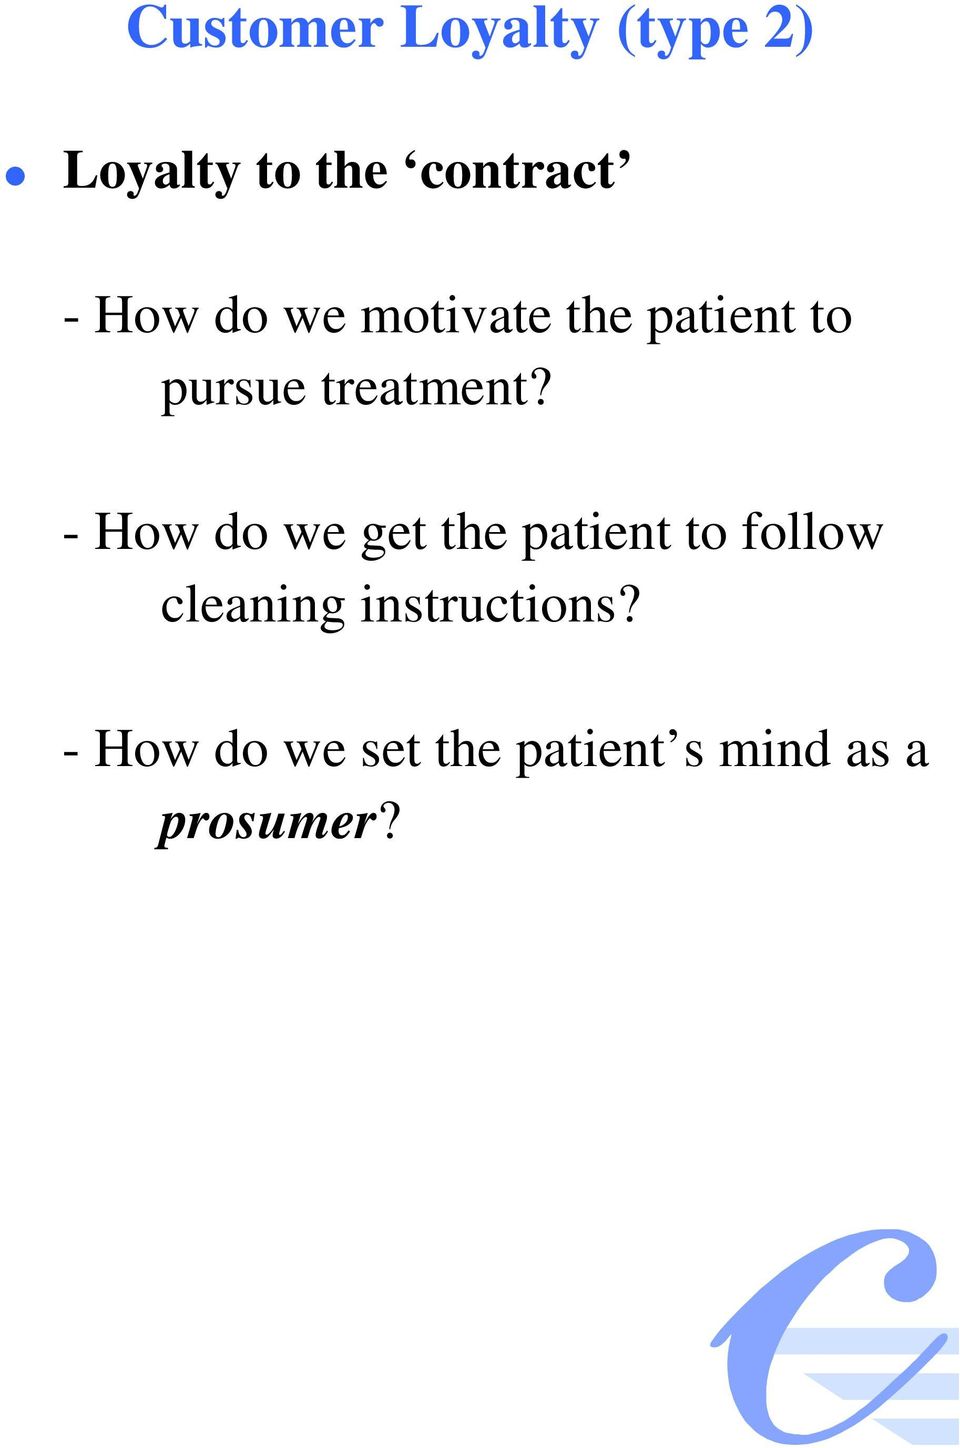 - How do we get the patient to follow cleaning